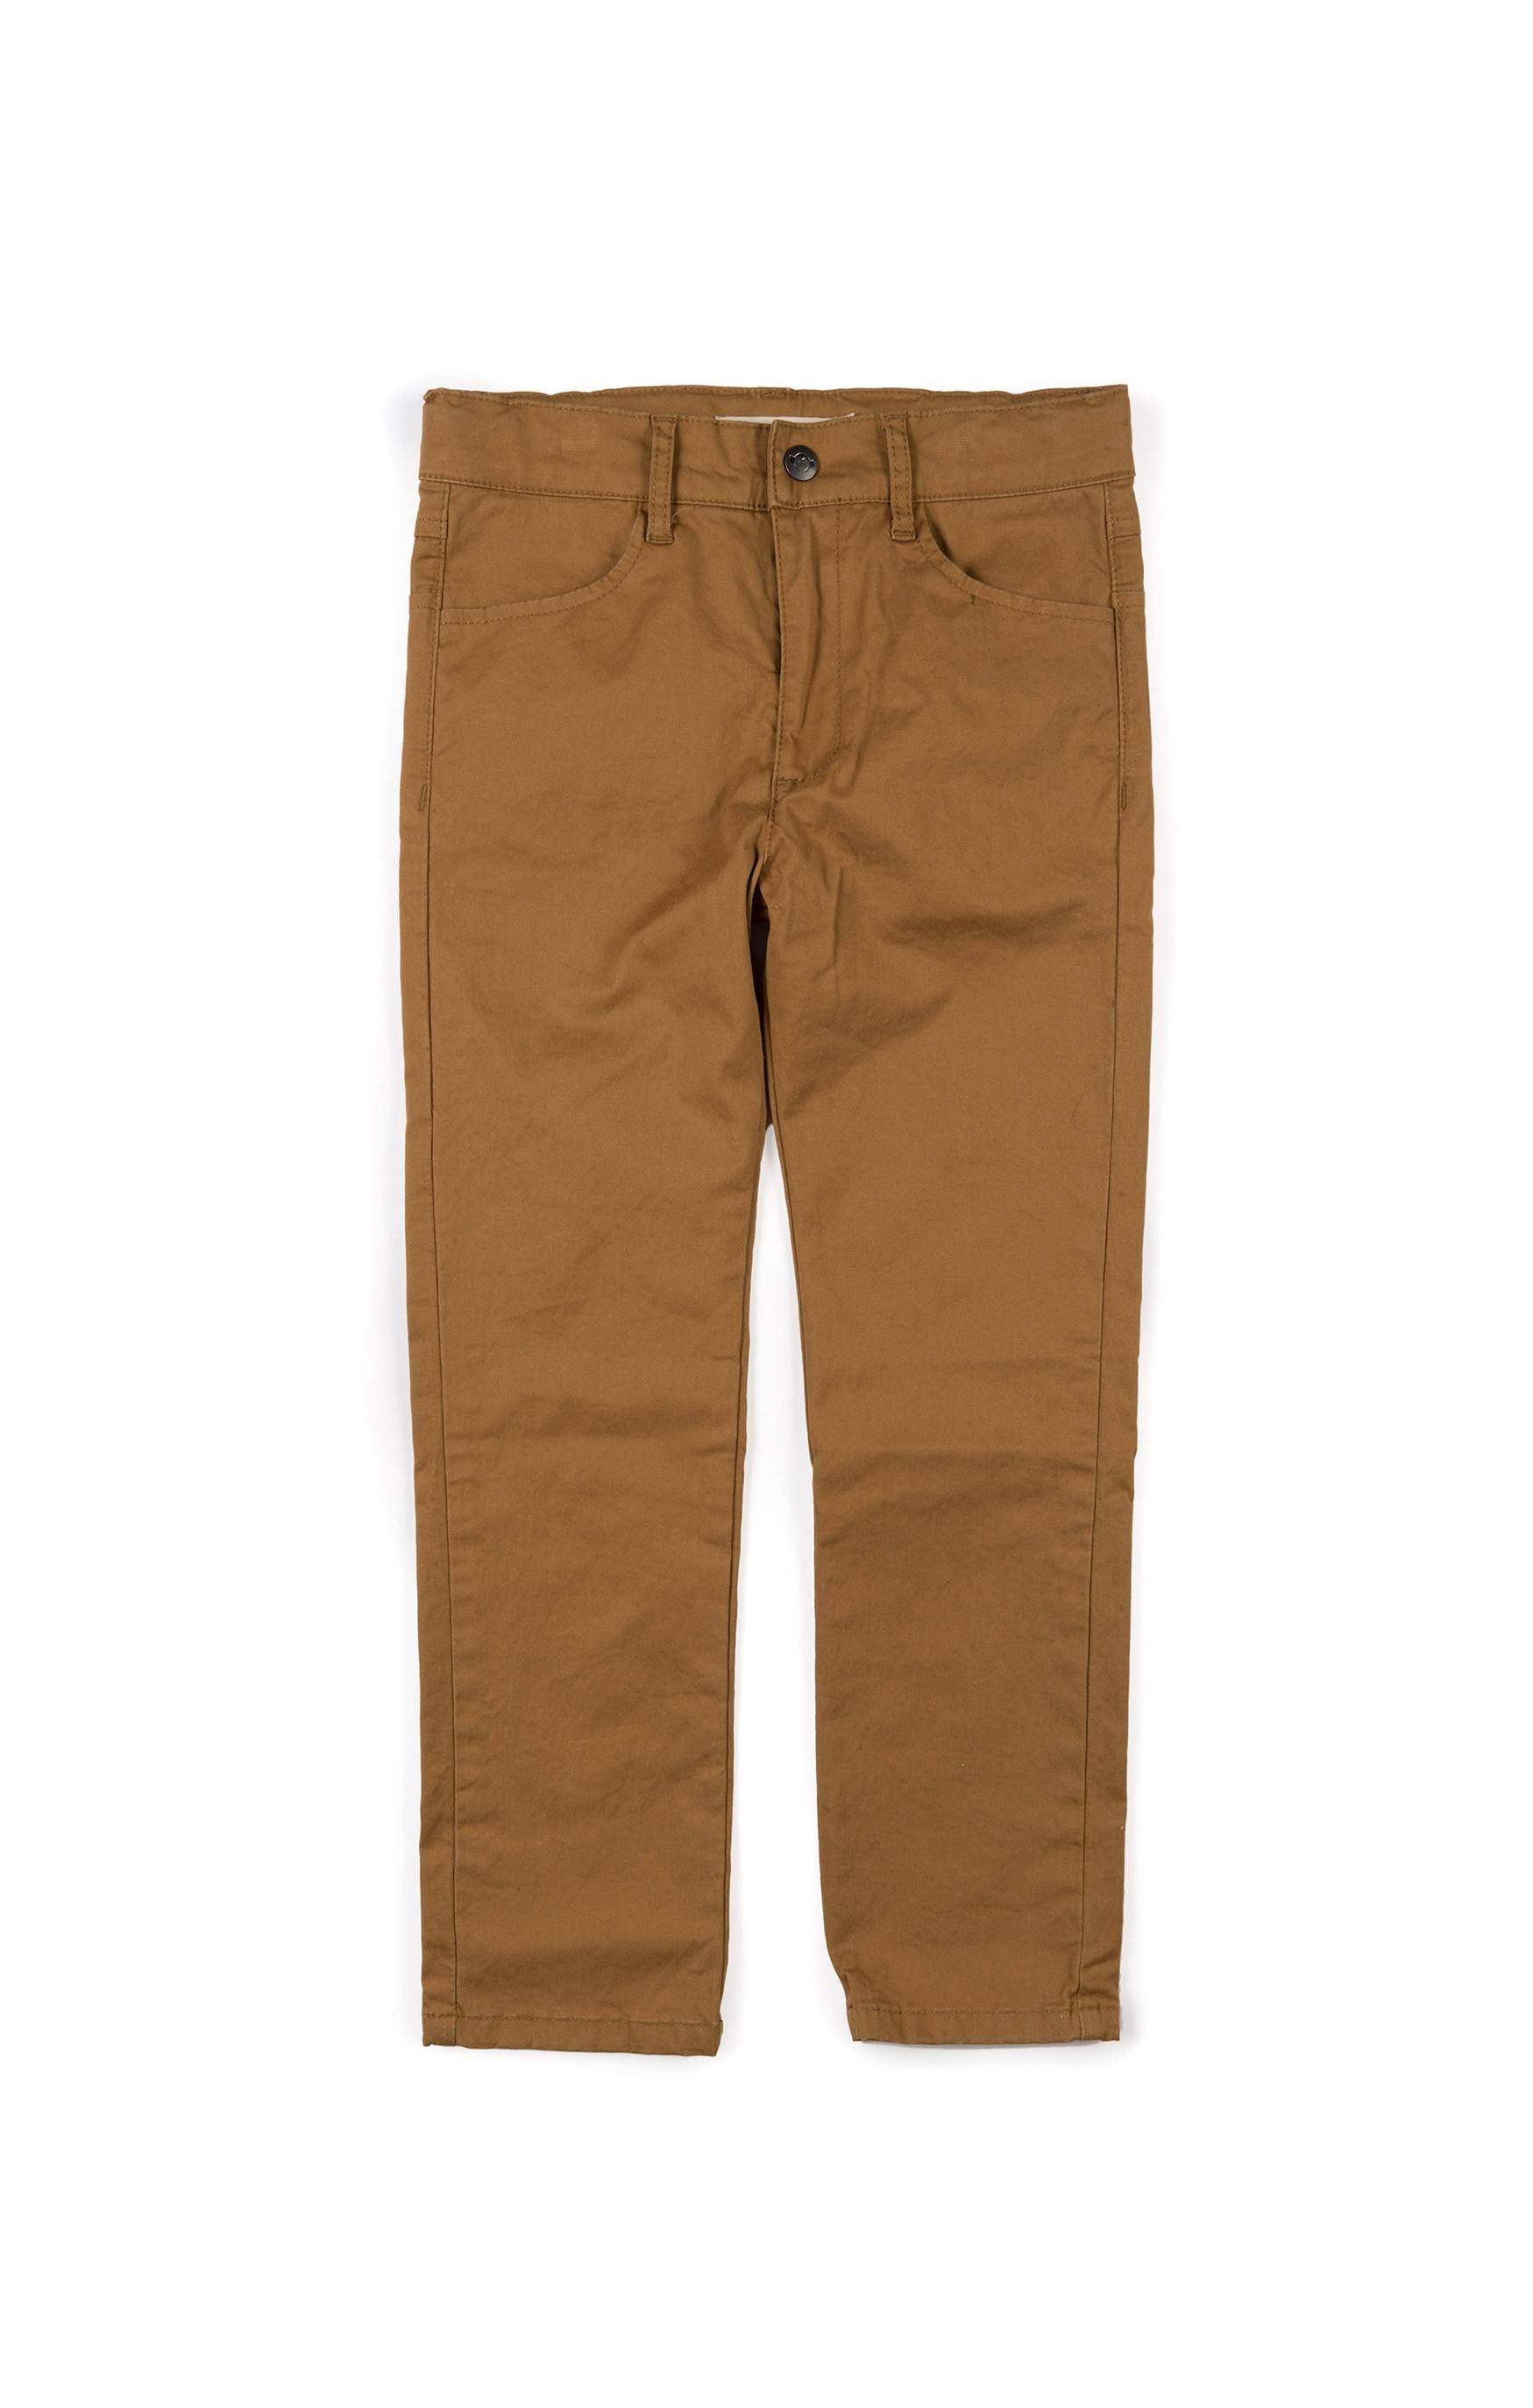 Mayoral Khaki Slim Fit Pants for Boy 12-04591-021 - Barbopoulos store,  Chania